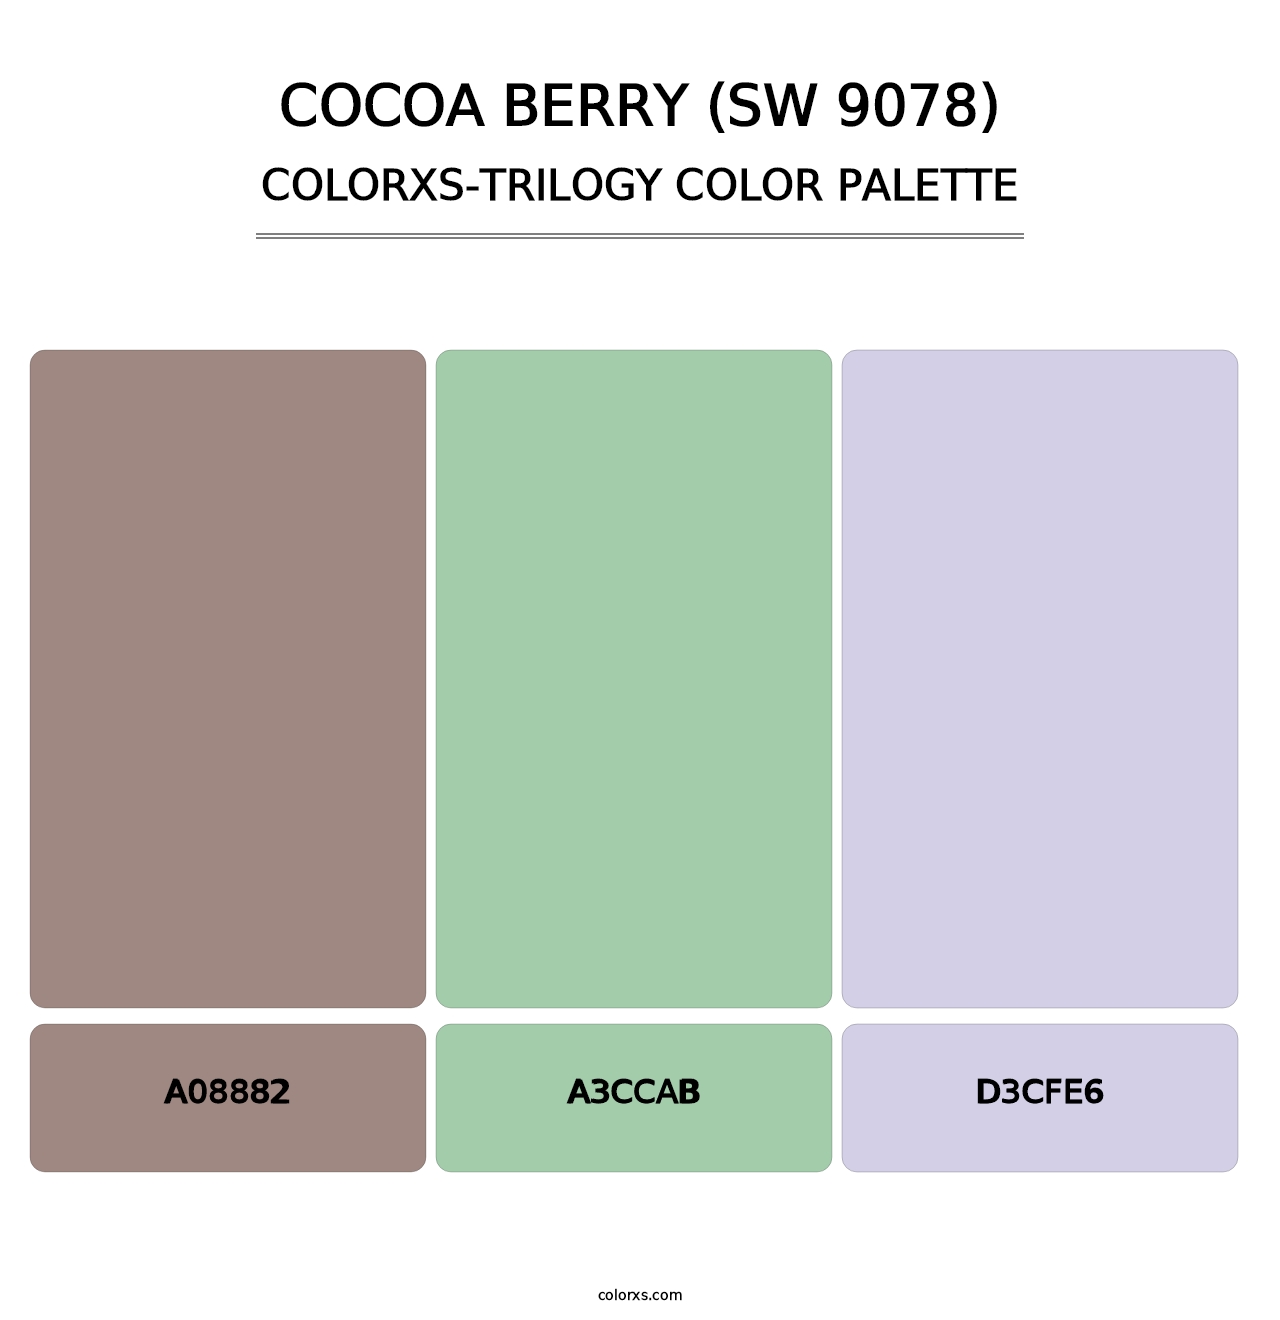 Cocoa Berry (SW 9078) - Colorxs Trilogy Palette